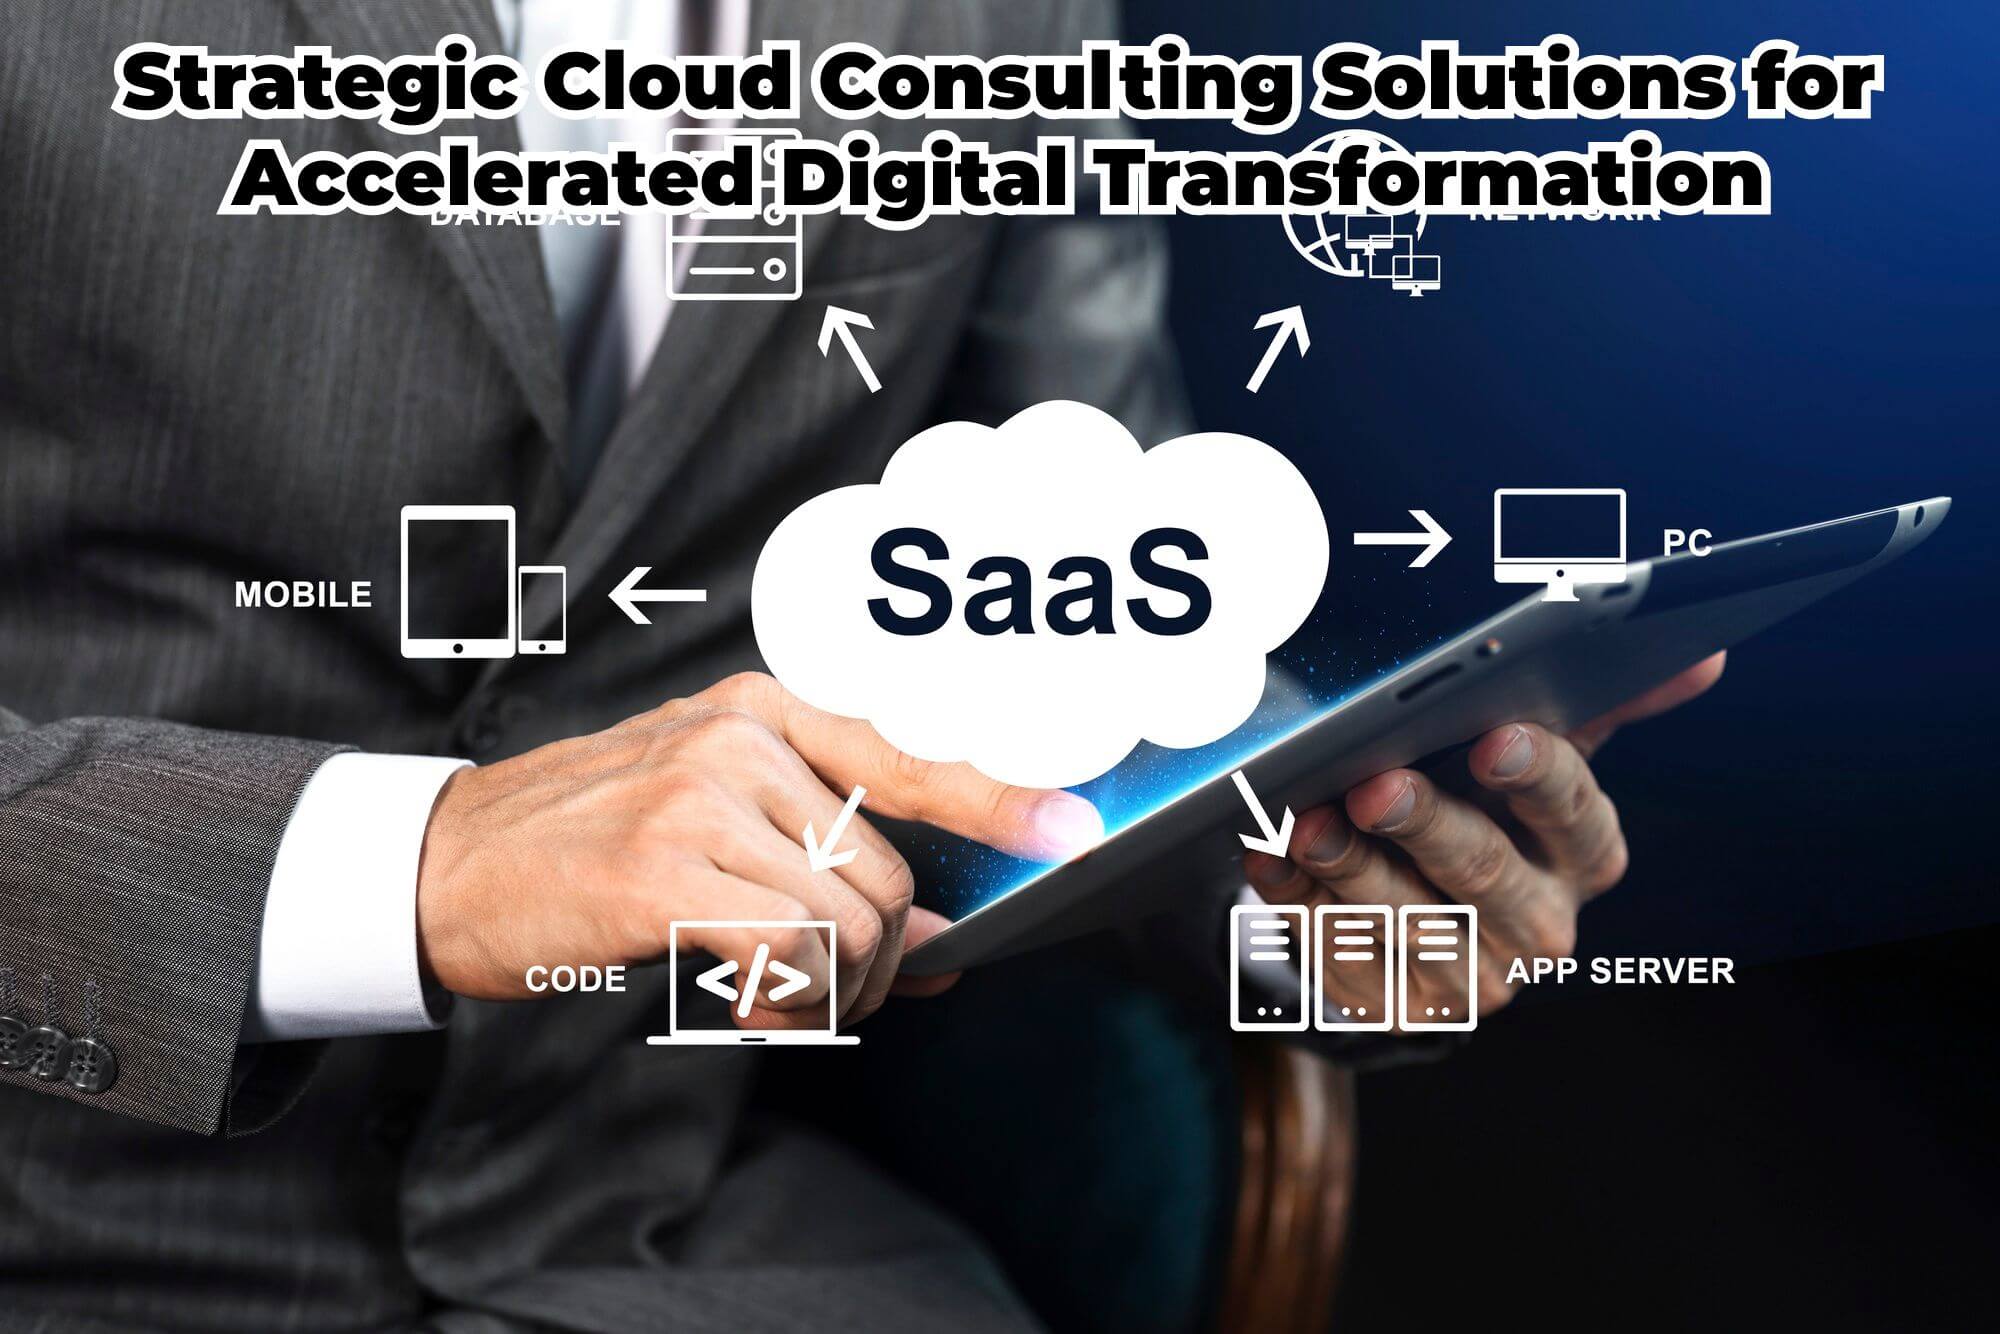 Cloud Consulting Solutions